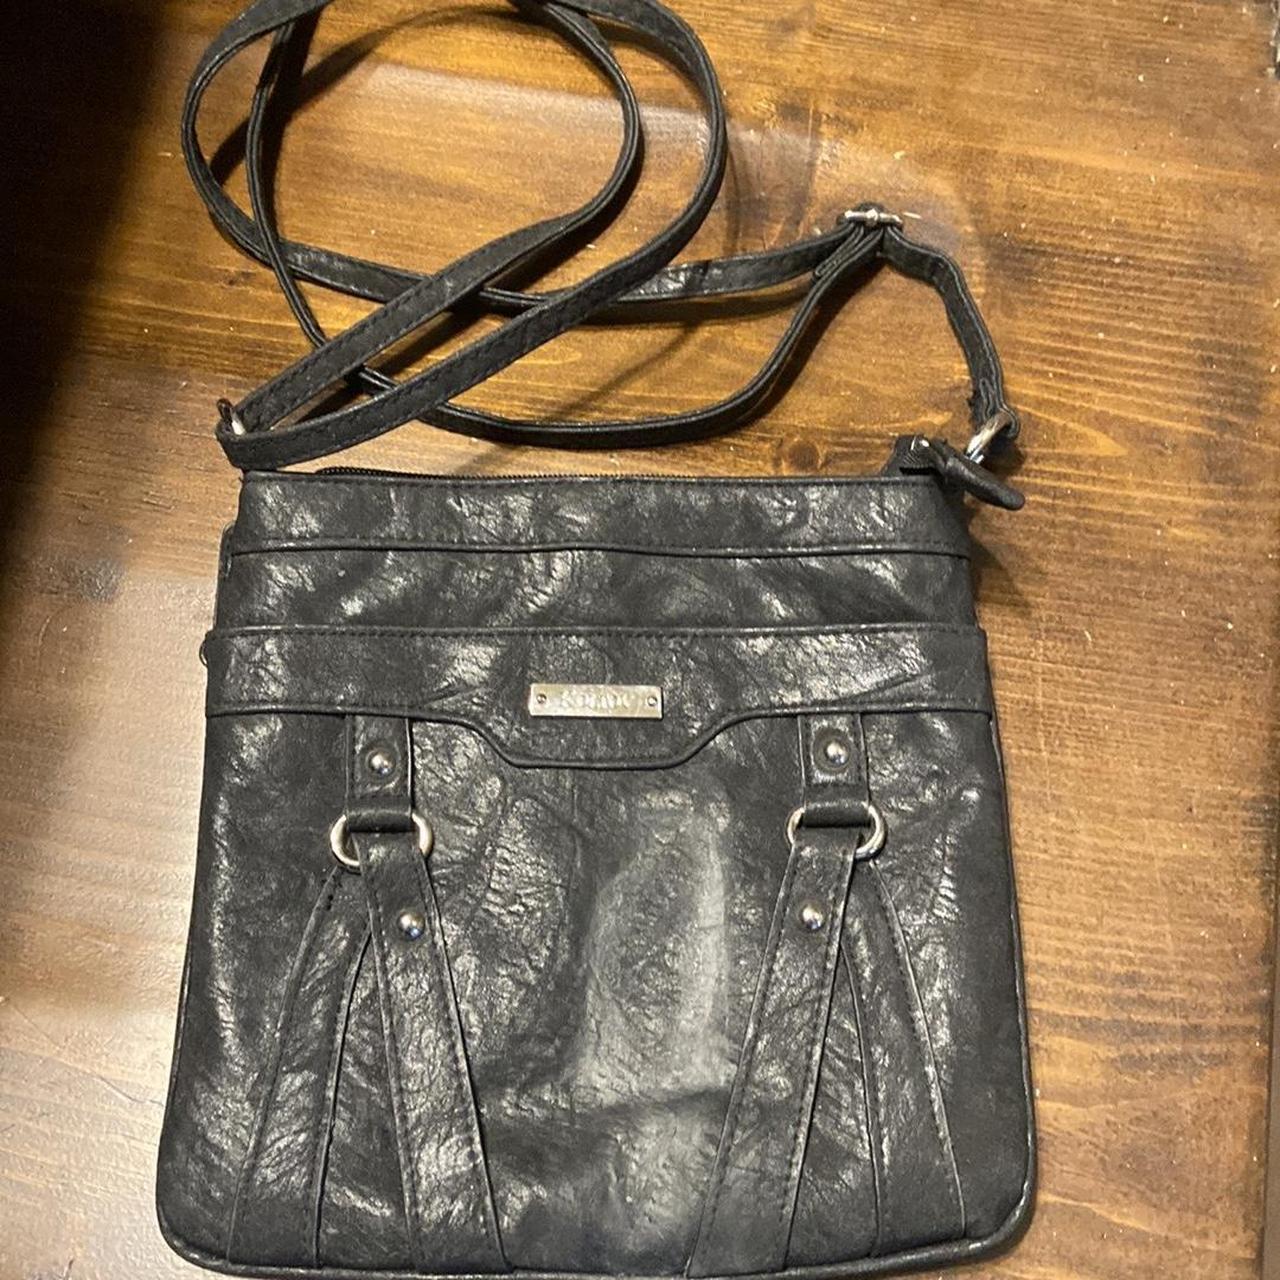 Black Purses for sale in Knoxville, Tennessee | Facebook Marketplace |  Facebook